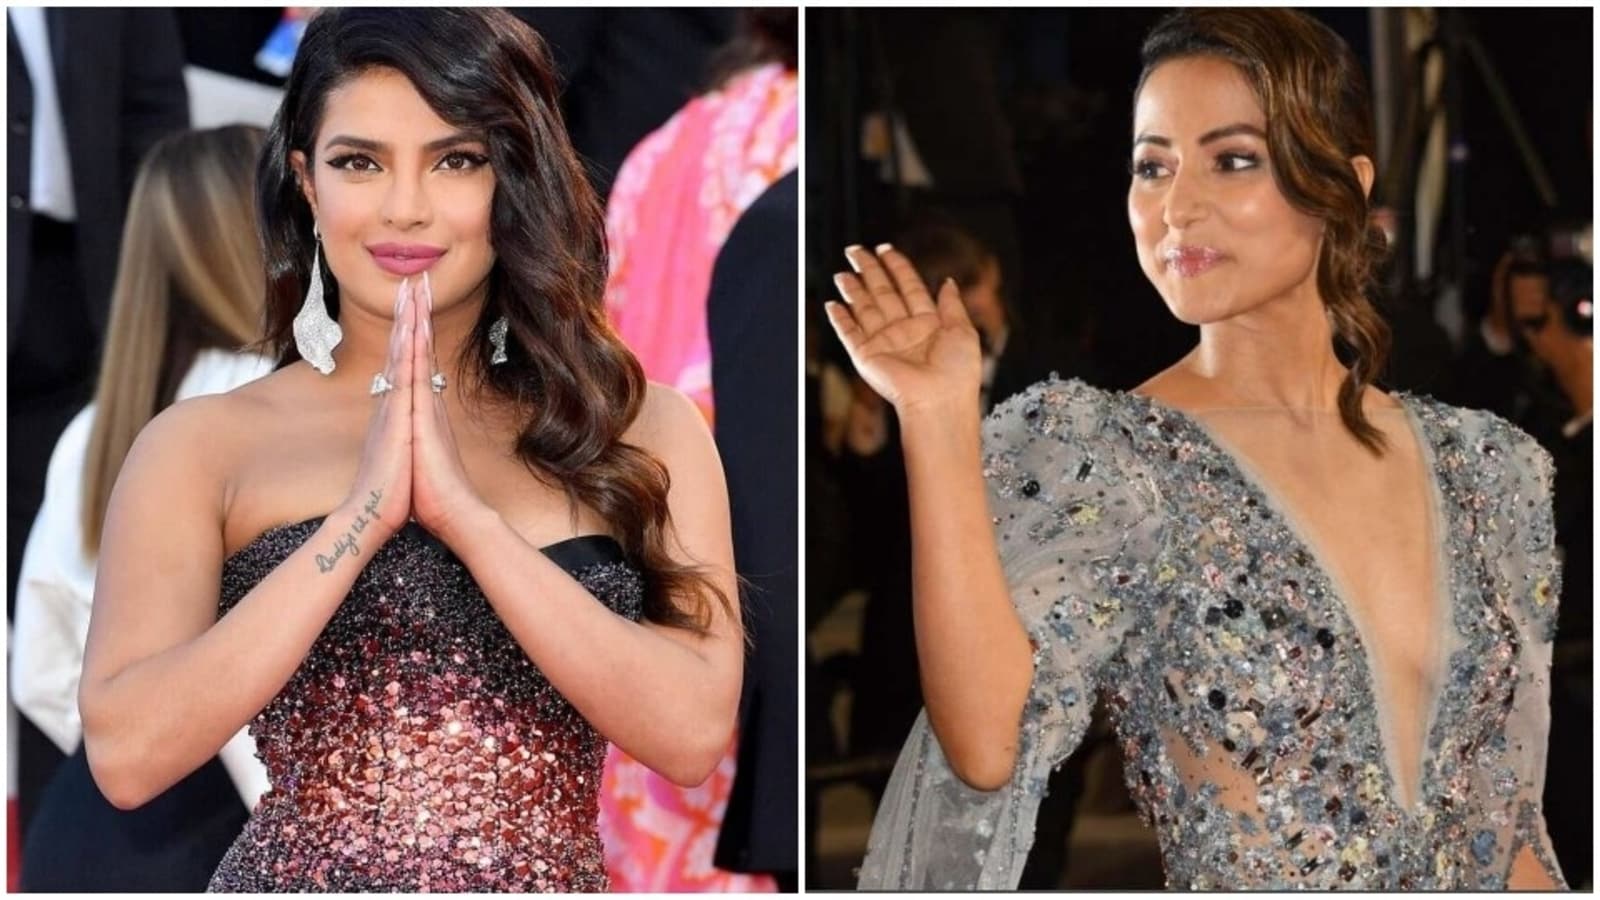 Cannes 2022: When Priyanka Chopra and Hina Khan made their grand debuts on the film festival red carpet